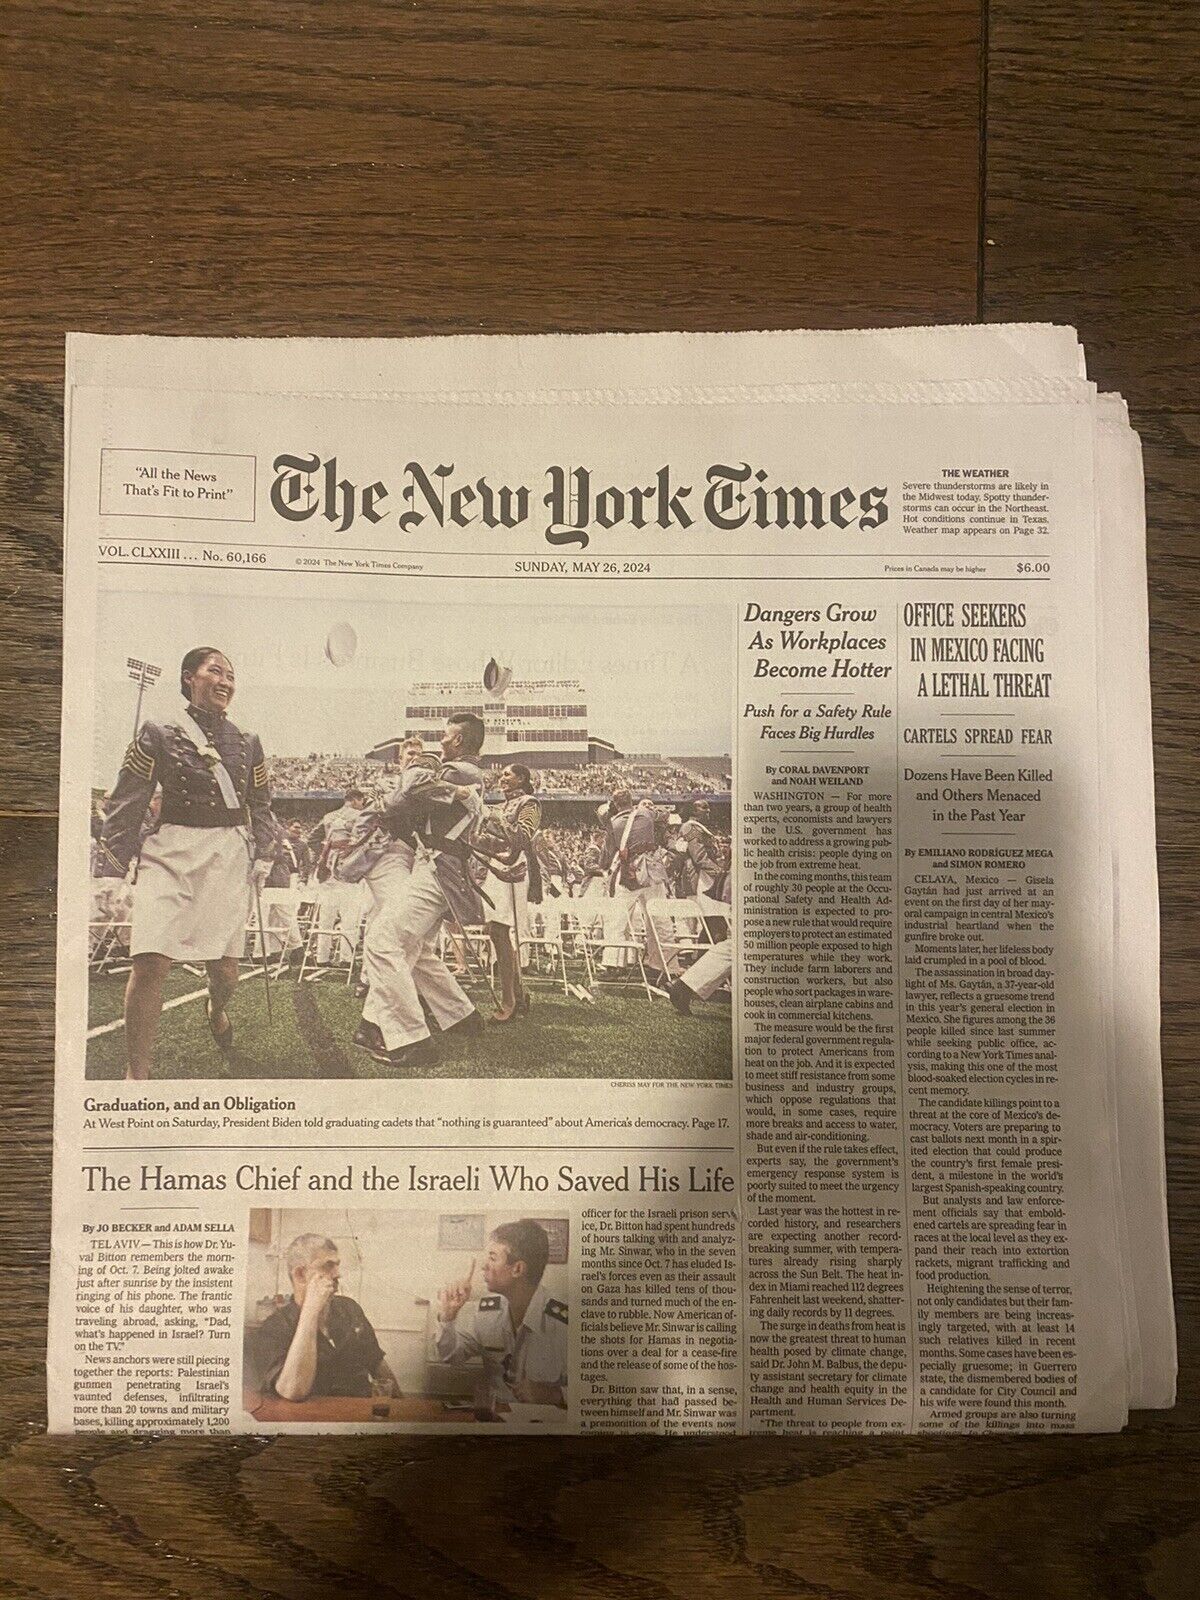 The New York Times Sunday May 26, 2024 Complete print Newspaper (NEW)